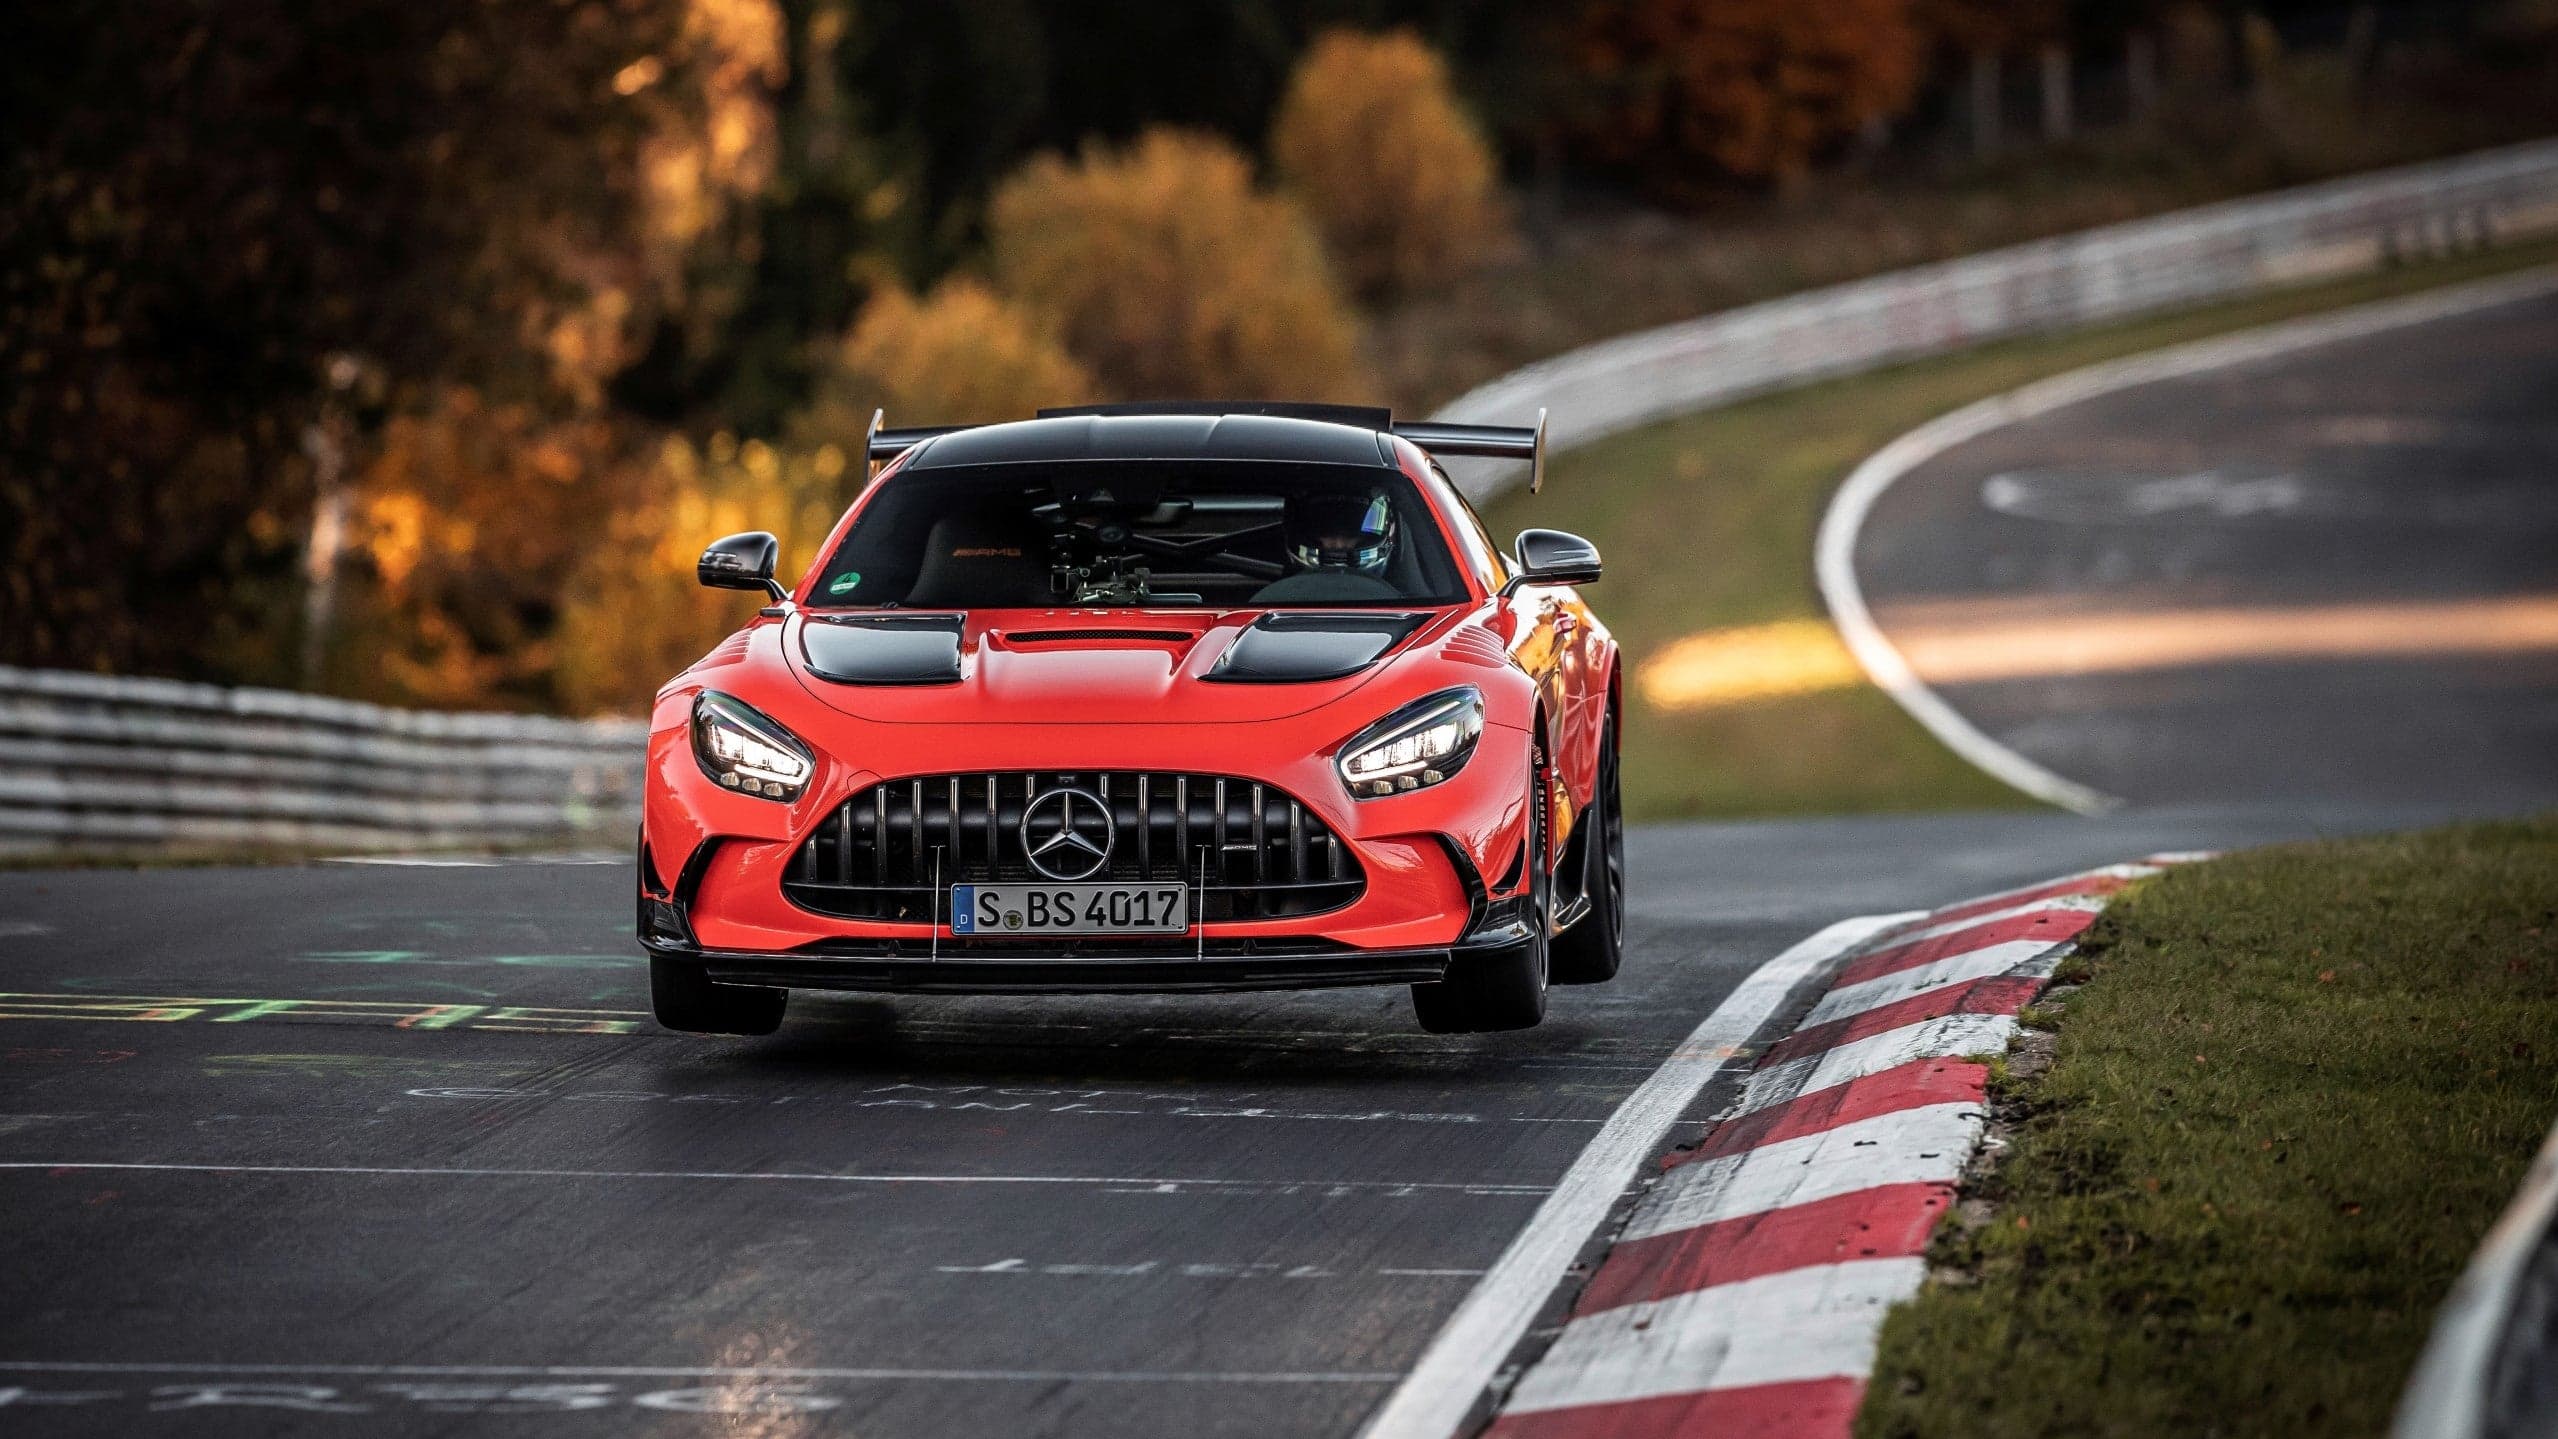 The Mercedes-AMG GT Black Series Is Now the Fastest Production Car Around the Nurburgring